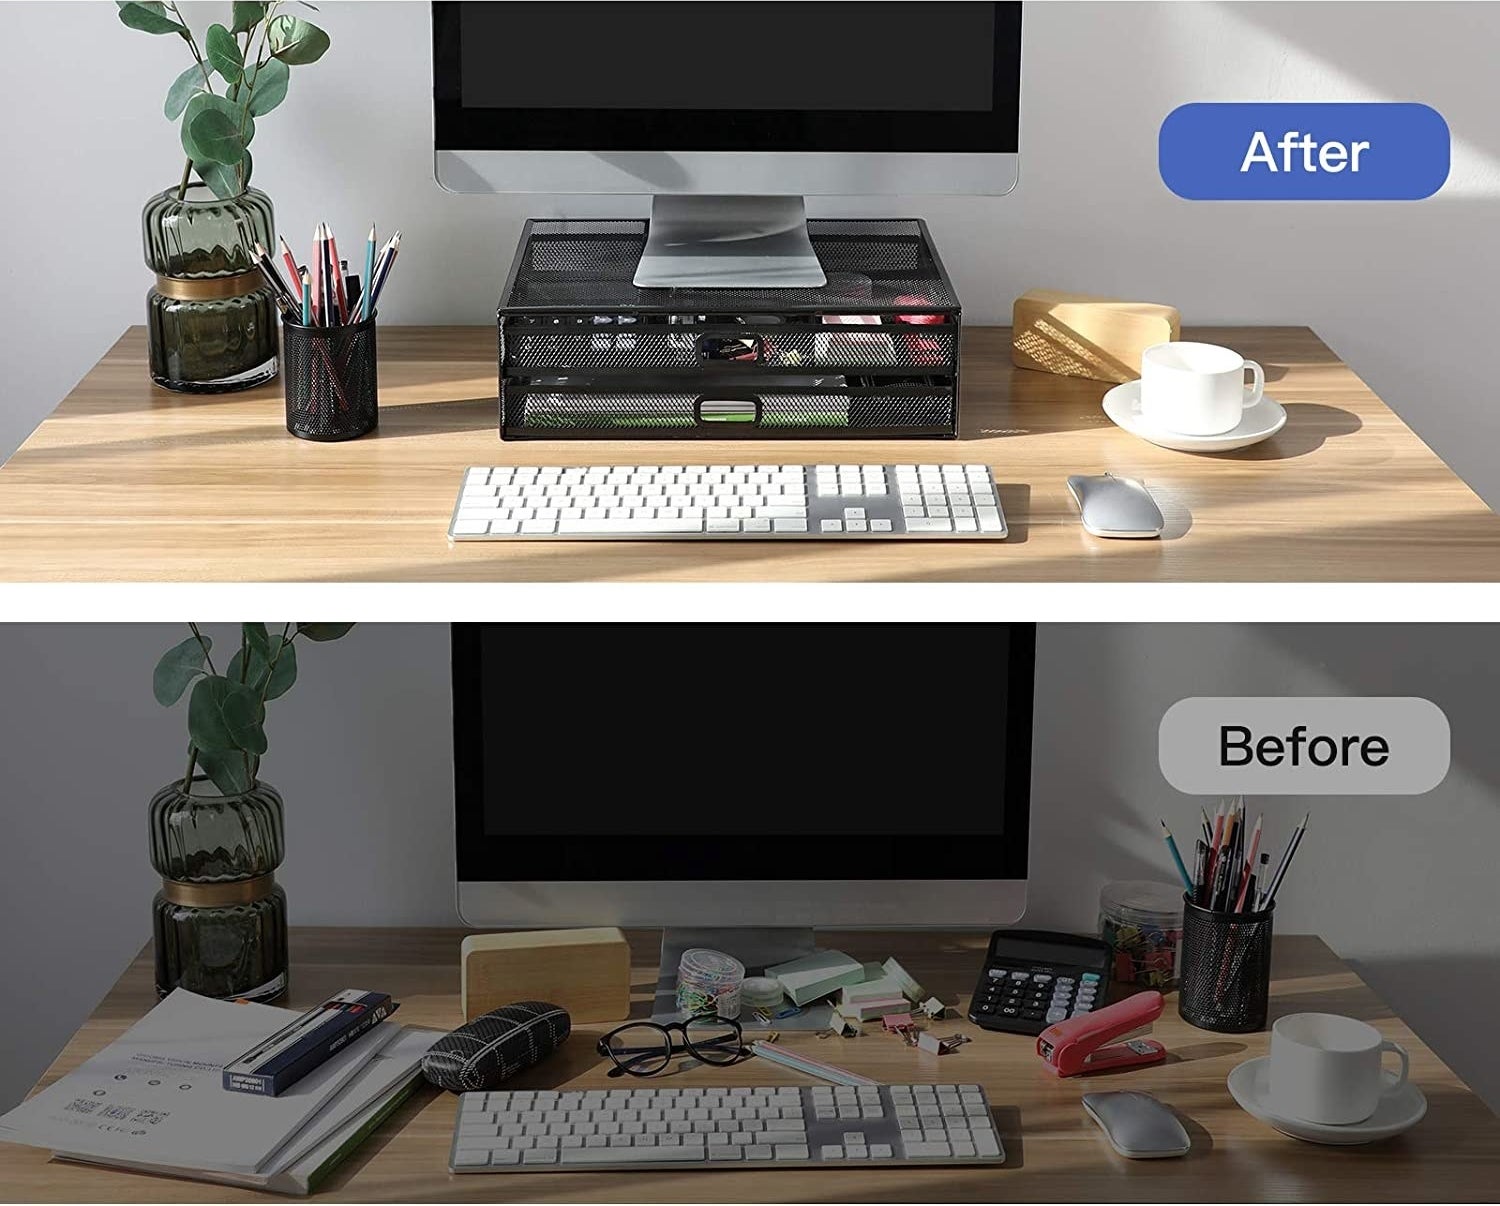 A before and after image should a desk cluttered with objects and then look super neat with the monitor riser